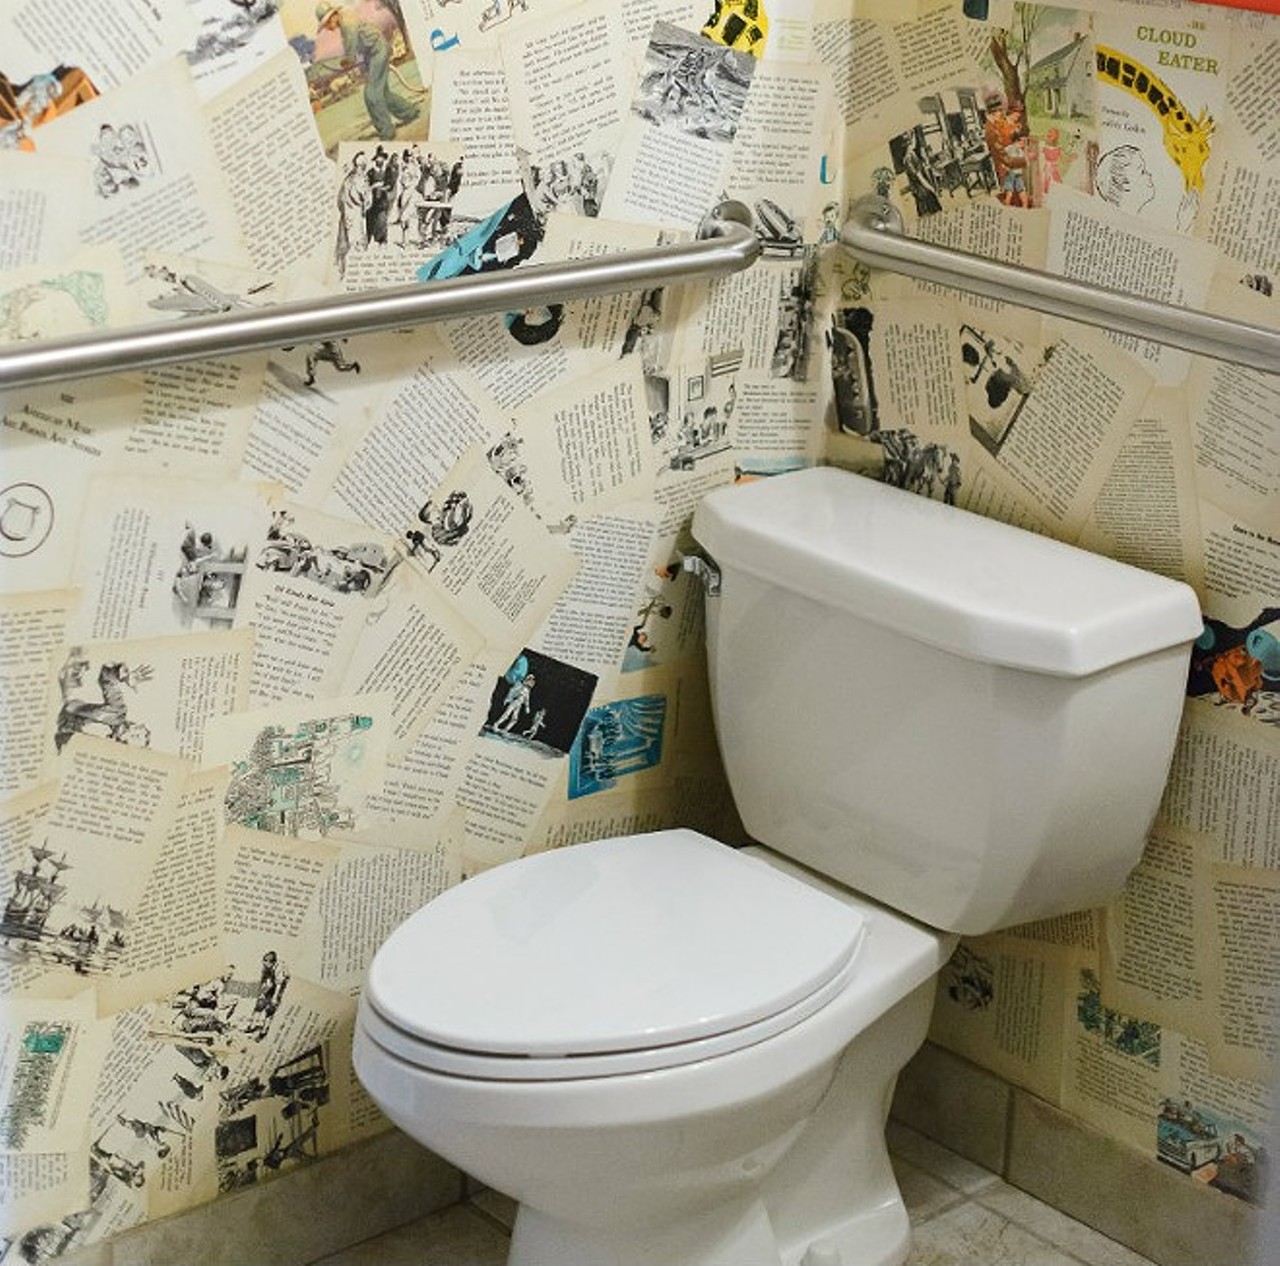 The Novel Neighbor
Get bored while doing your business? The Novel Neighbor (7905 Big Bend Boulevard, Webster Groves) has you covered. Like literally, the bathroom is covered in pages from old, discarded books, just take your pick. Back in 2016, the Novel Neighbor's restroom was named one of the 10 best in the nation by Cintas. And for good reason too — it's fun, clean and private, what more could you ask for in a public bathroom?